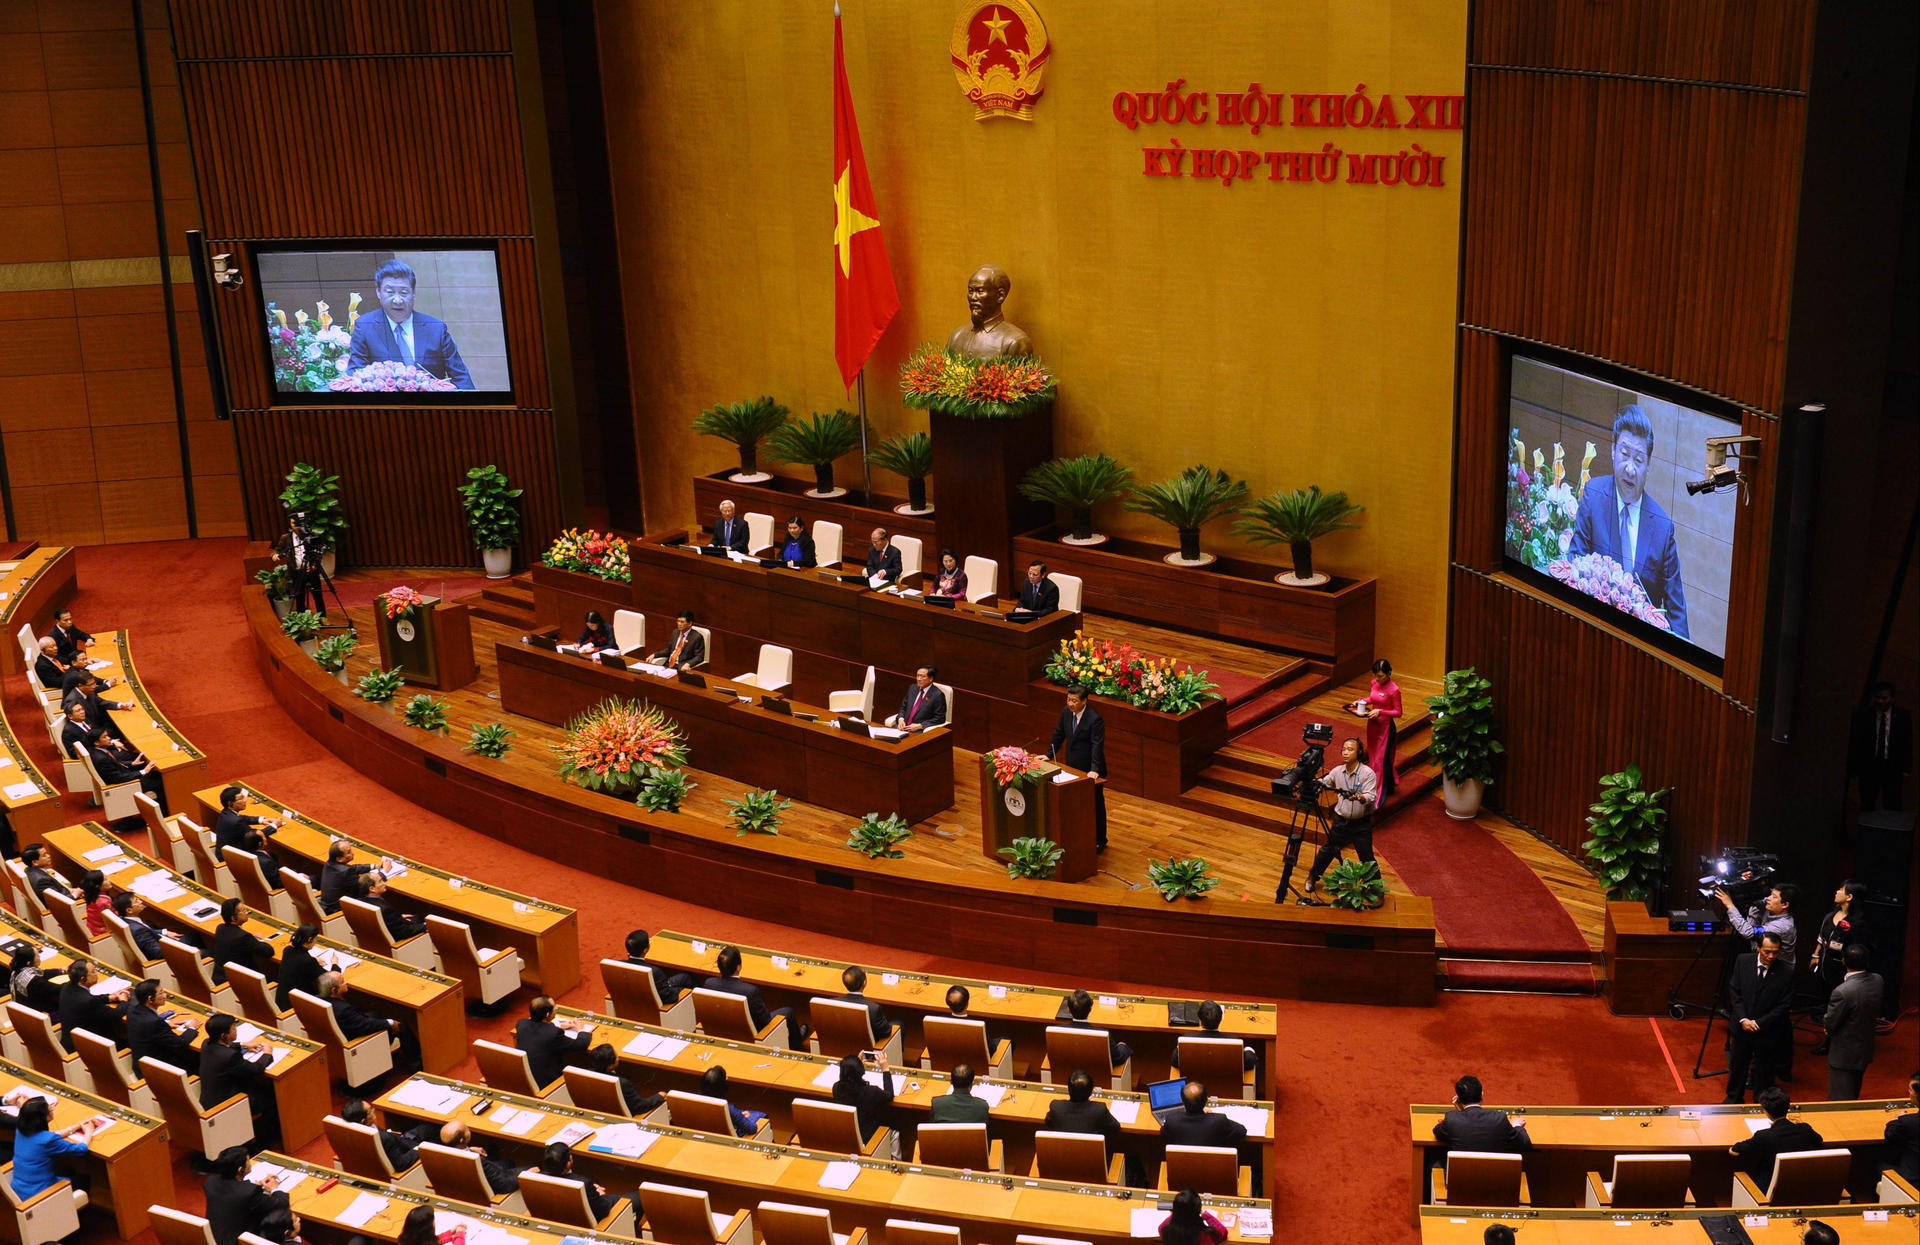 President Xi Jinping tells nearly 500 members of the Vietnamese parliament in Hanoi on Friday that the two nations should remain 'trusted comrades'. Photo: AFP